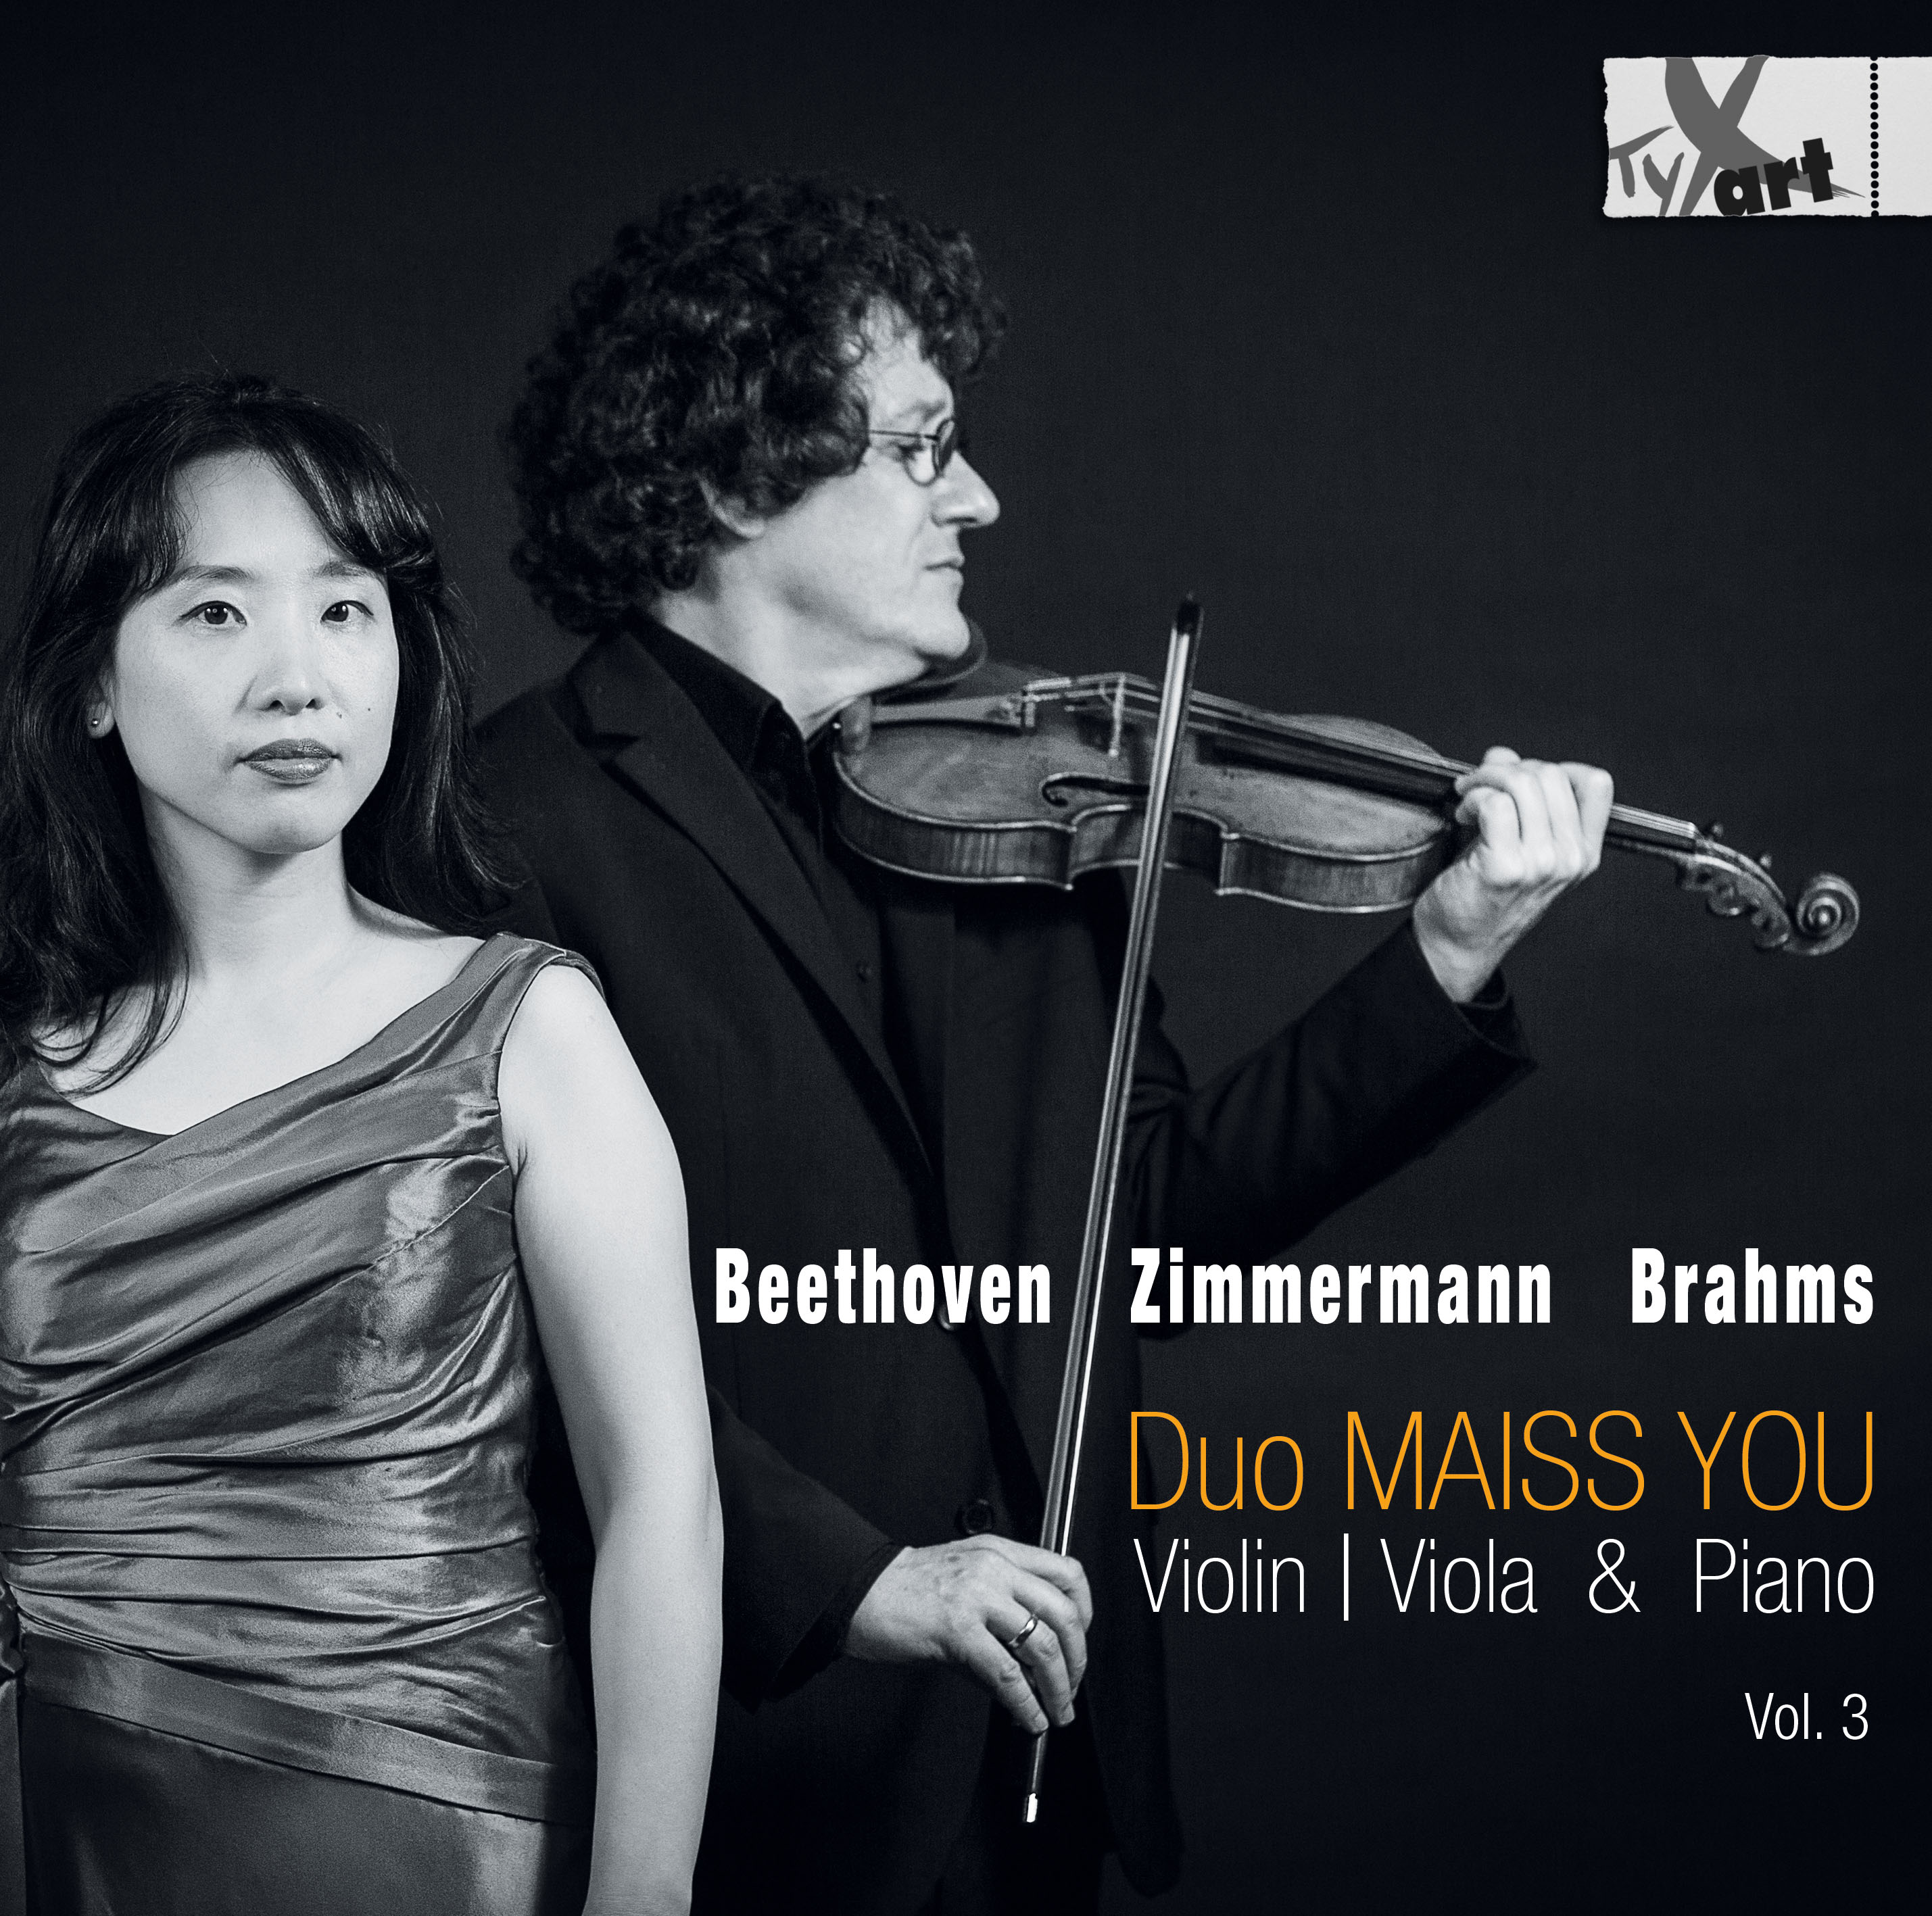 Beethoven Zimmermann Brahms - Duo MAISS YOU - Vol. 3